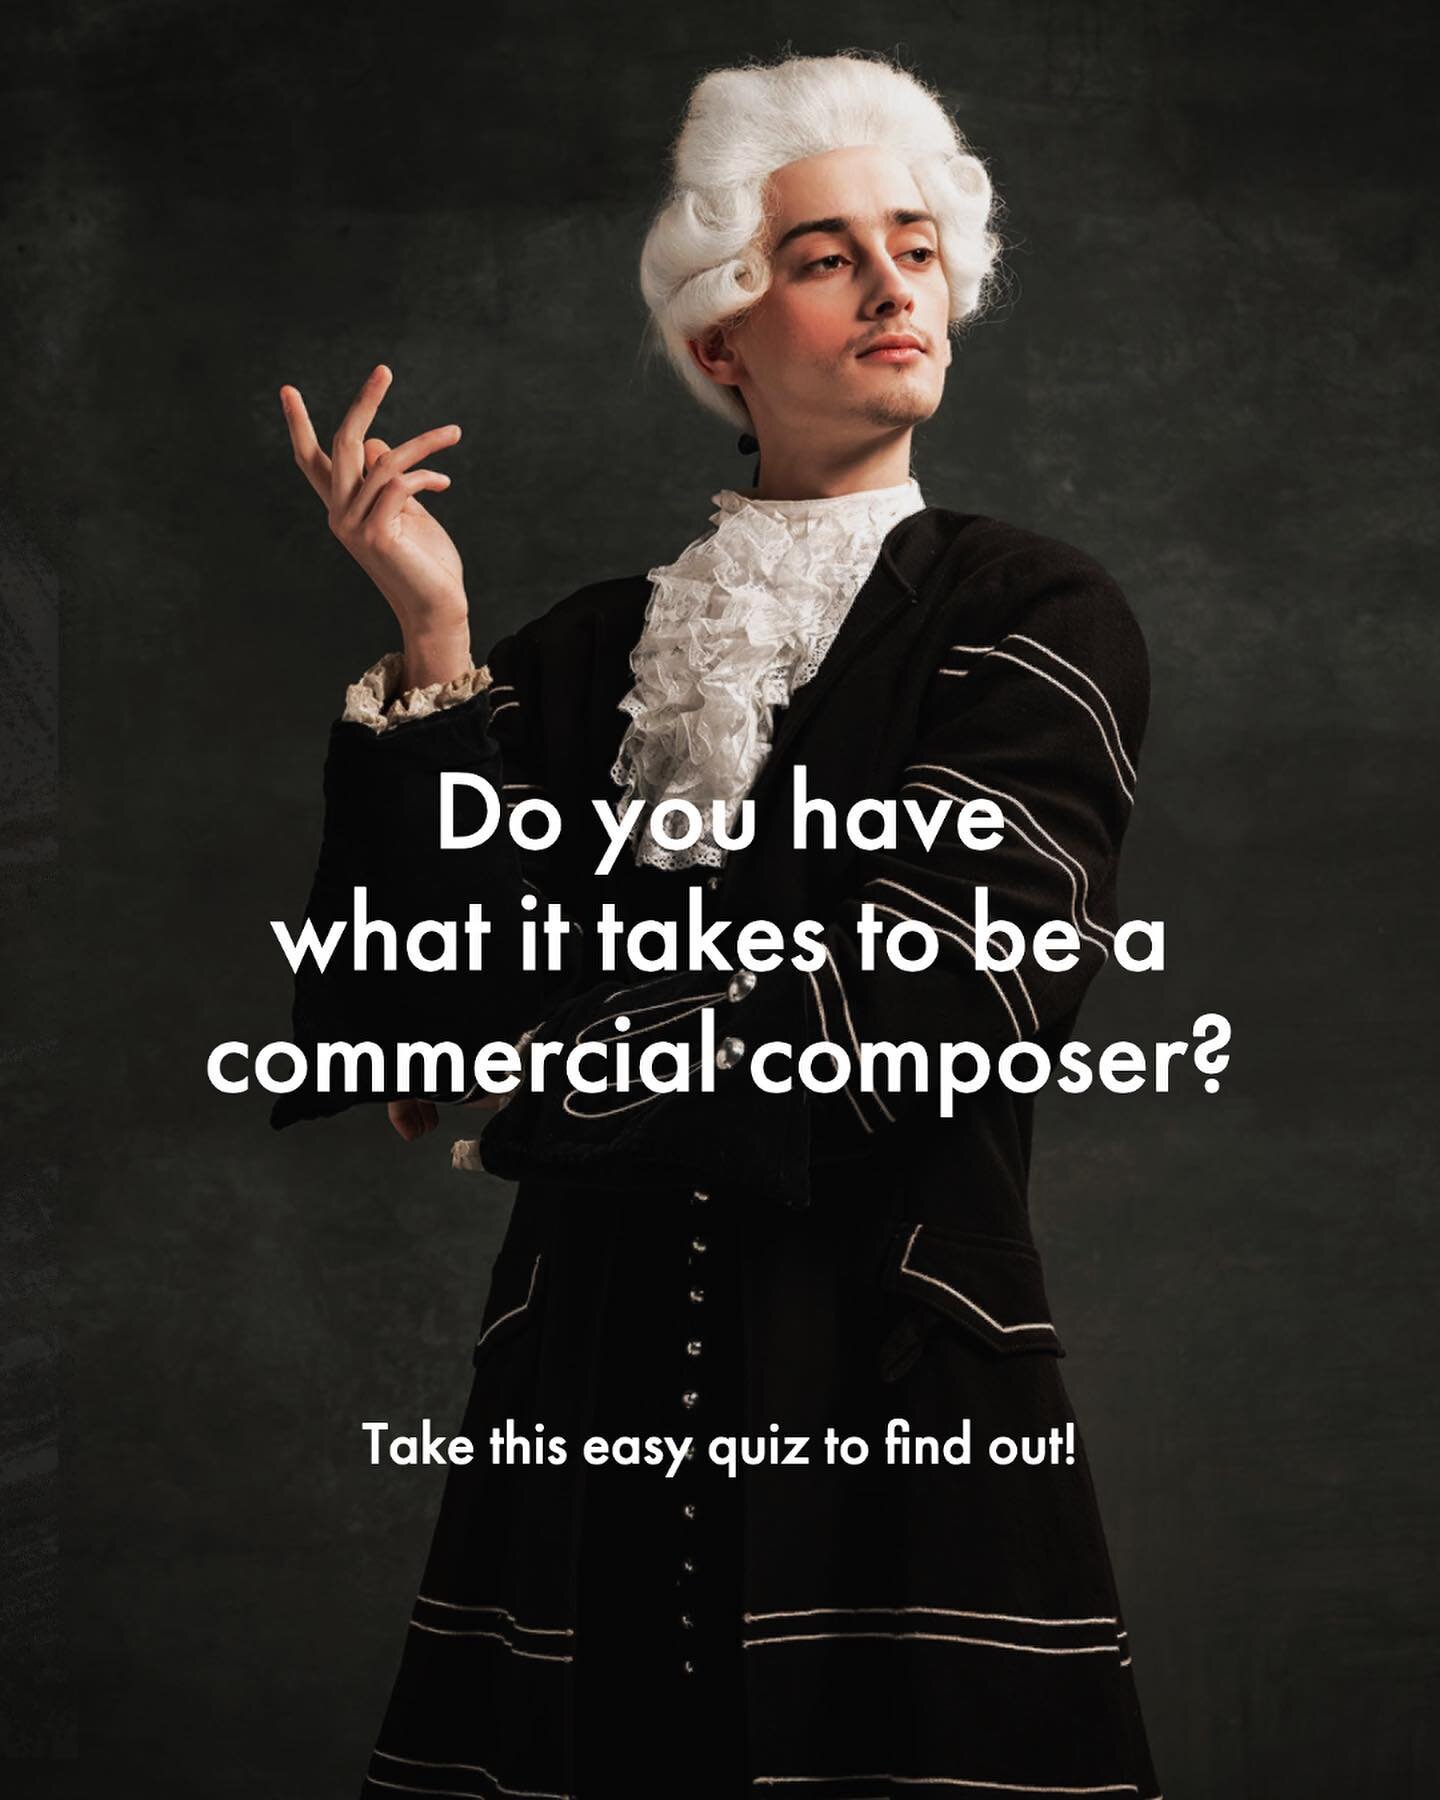 This work isn&rsquo;t for everyone, but if you answered yes to any of these questions, you might be perfectly suited to join the composer ranks at Howling Music. Send us your awesome music (bonus points for vintage and eclectic music) to jobs@howling